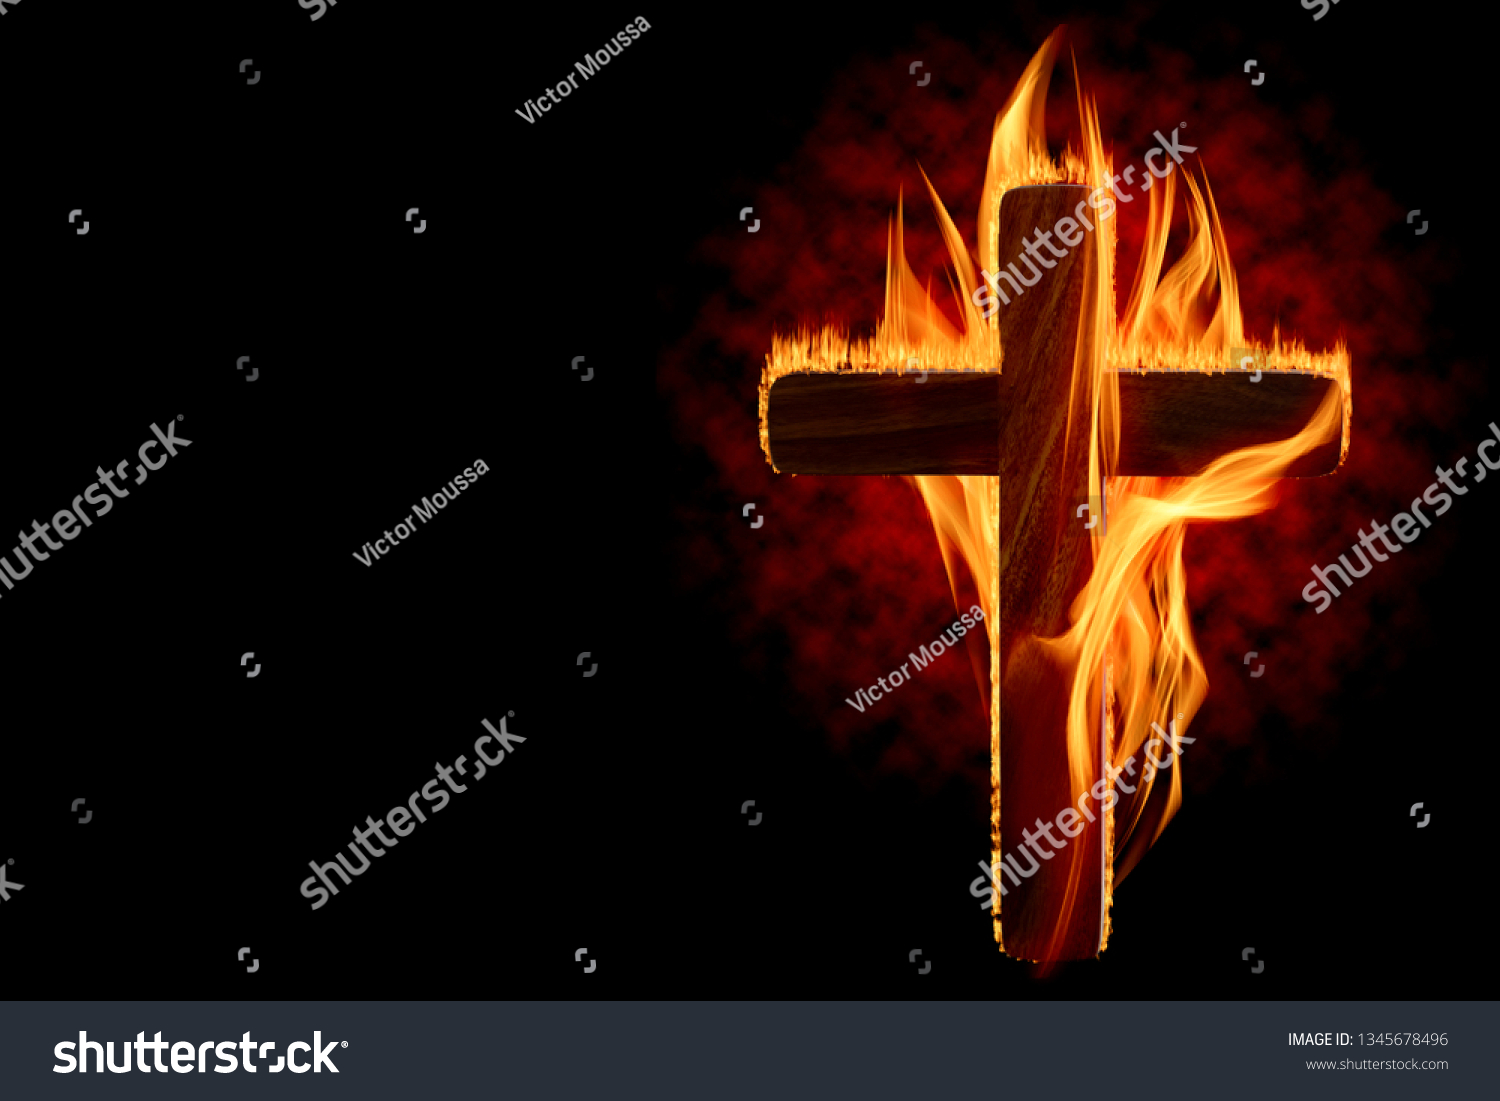 21,036 Cross And Flame Images, Stock Photos & Vectors | Shutterstock